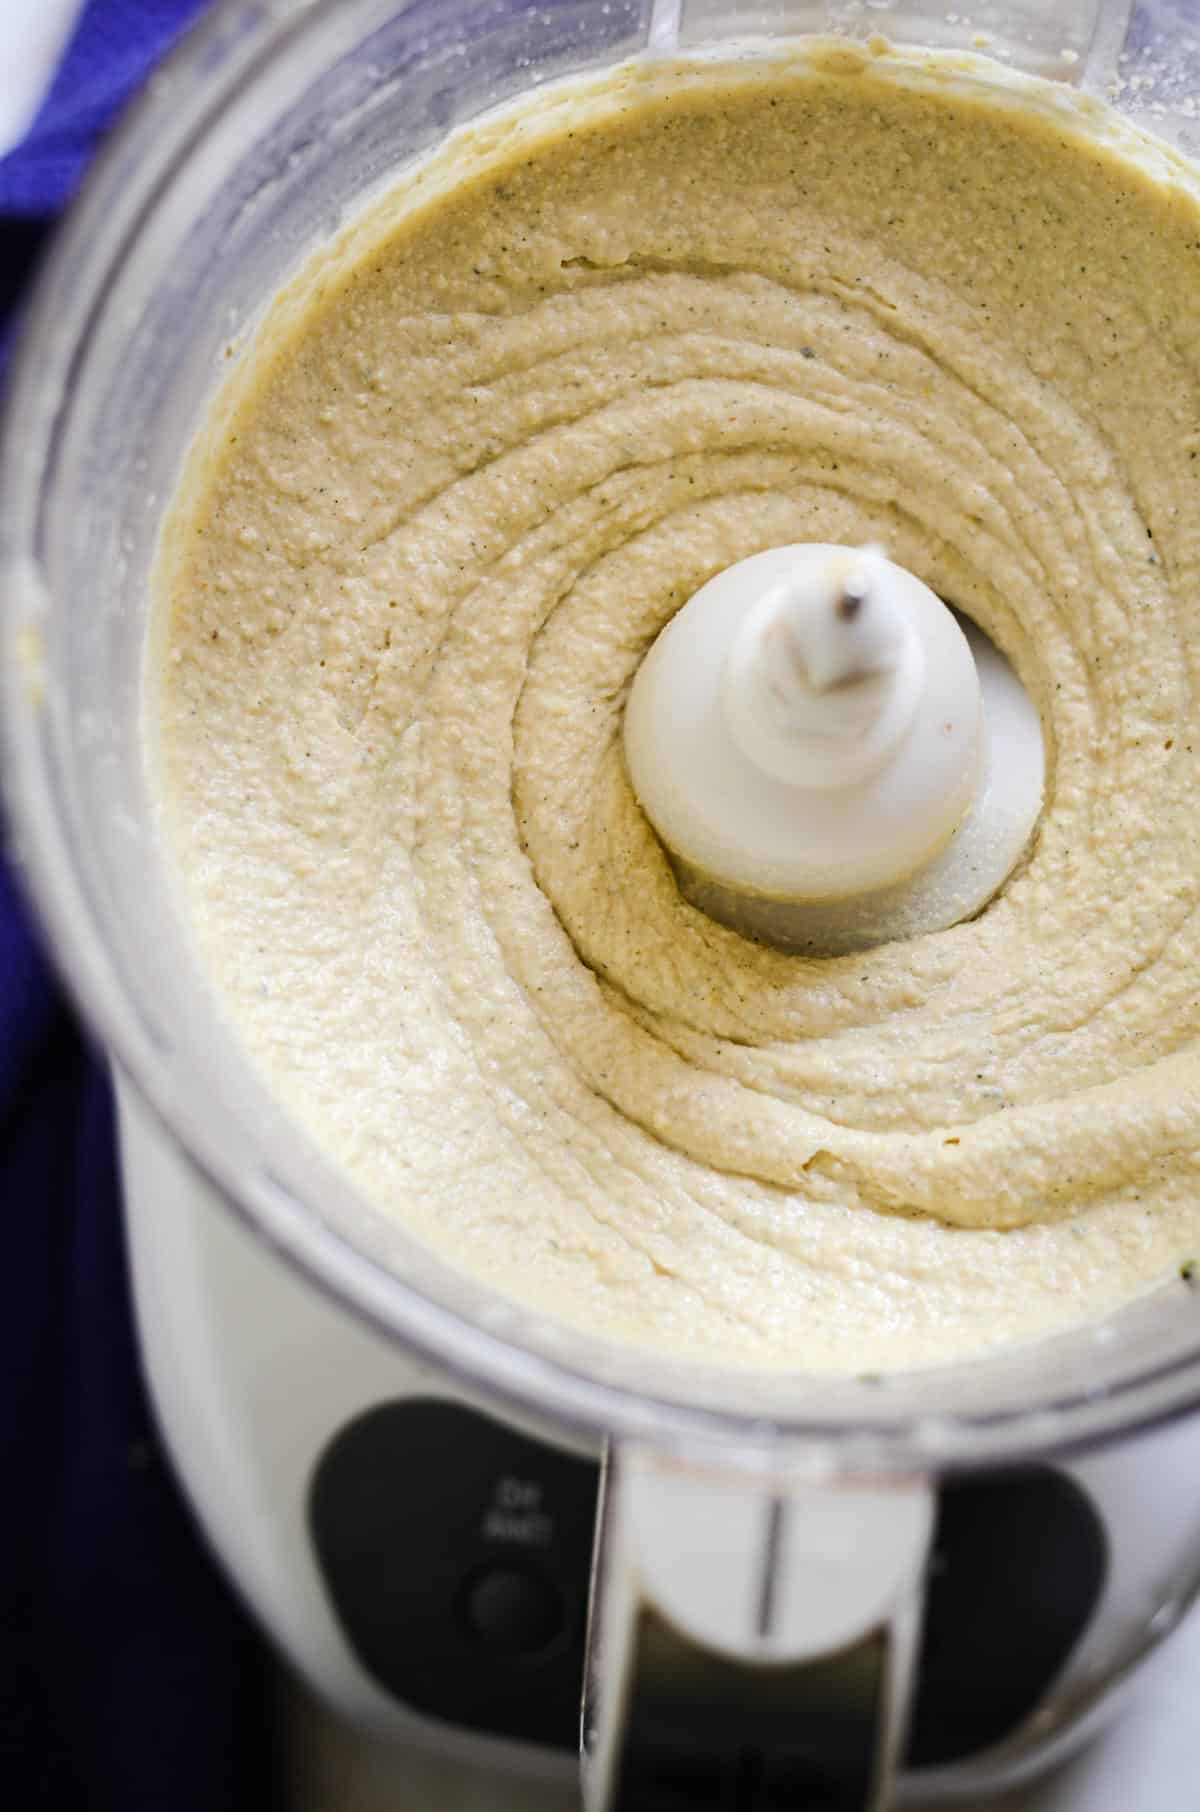 Super smooth homemade hummus in a food processor container.